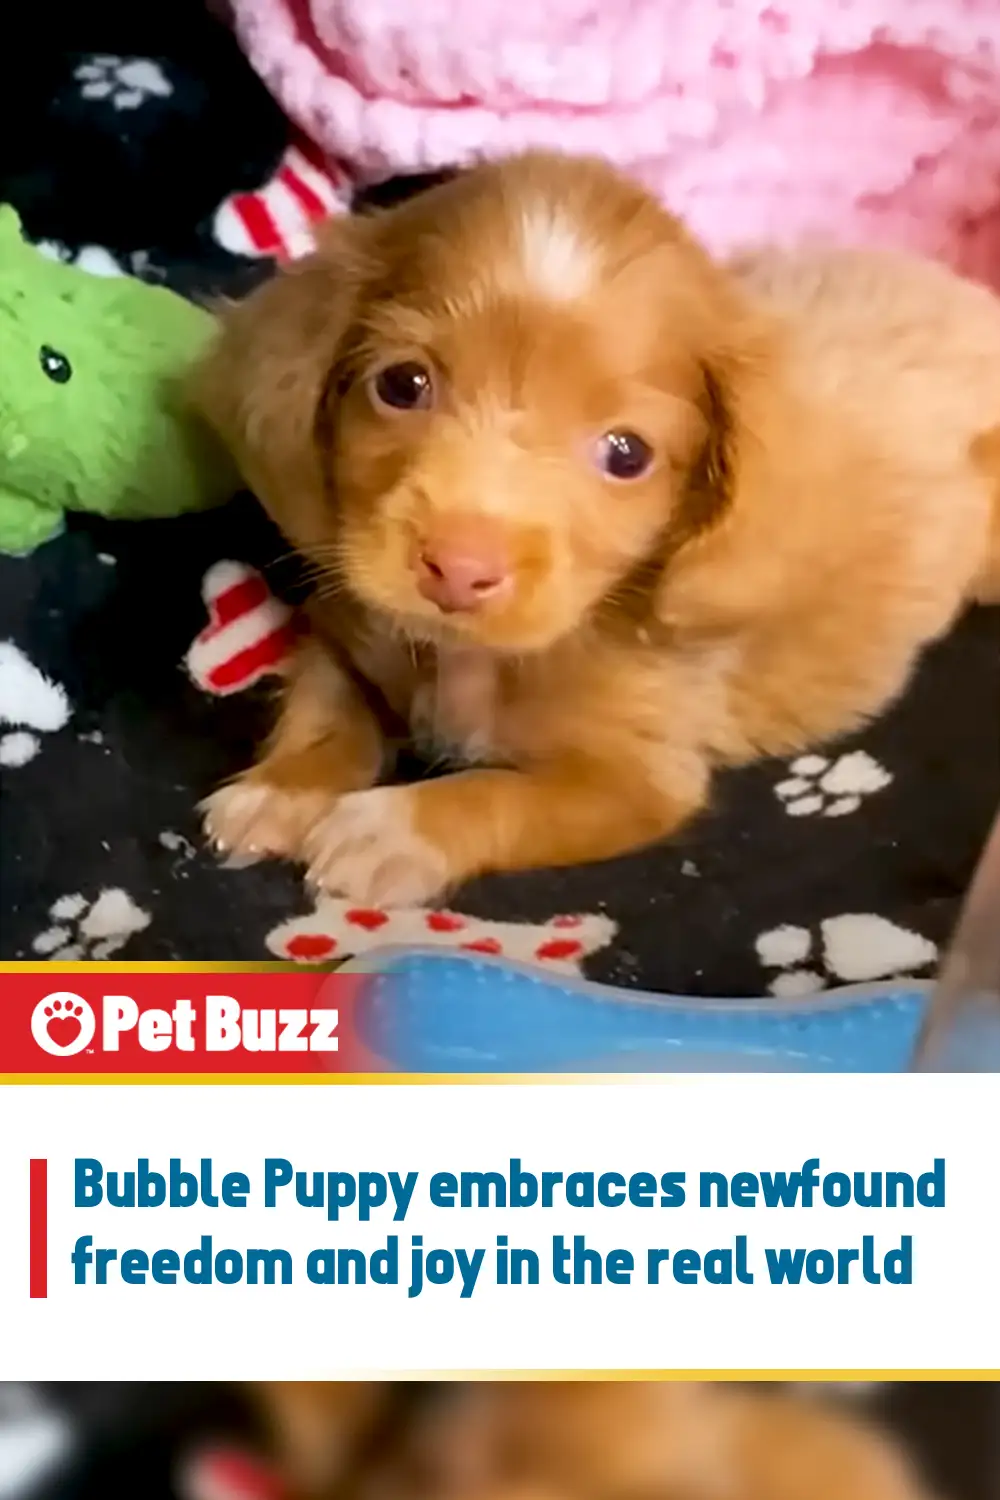 Bubble Puppy embraces newfound freedom and joy in the real world